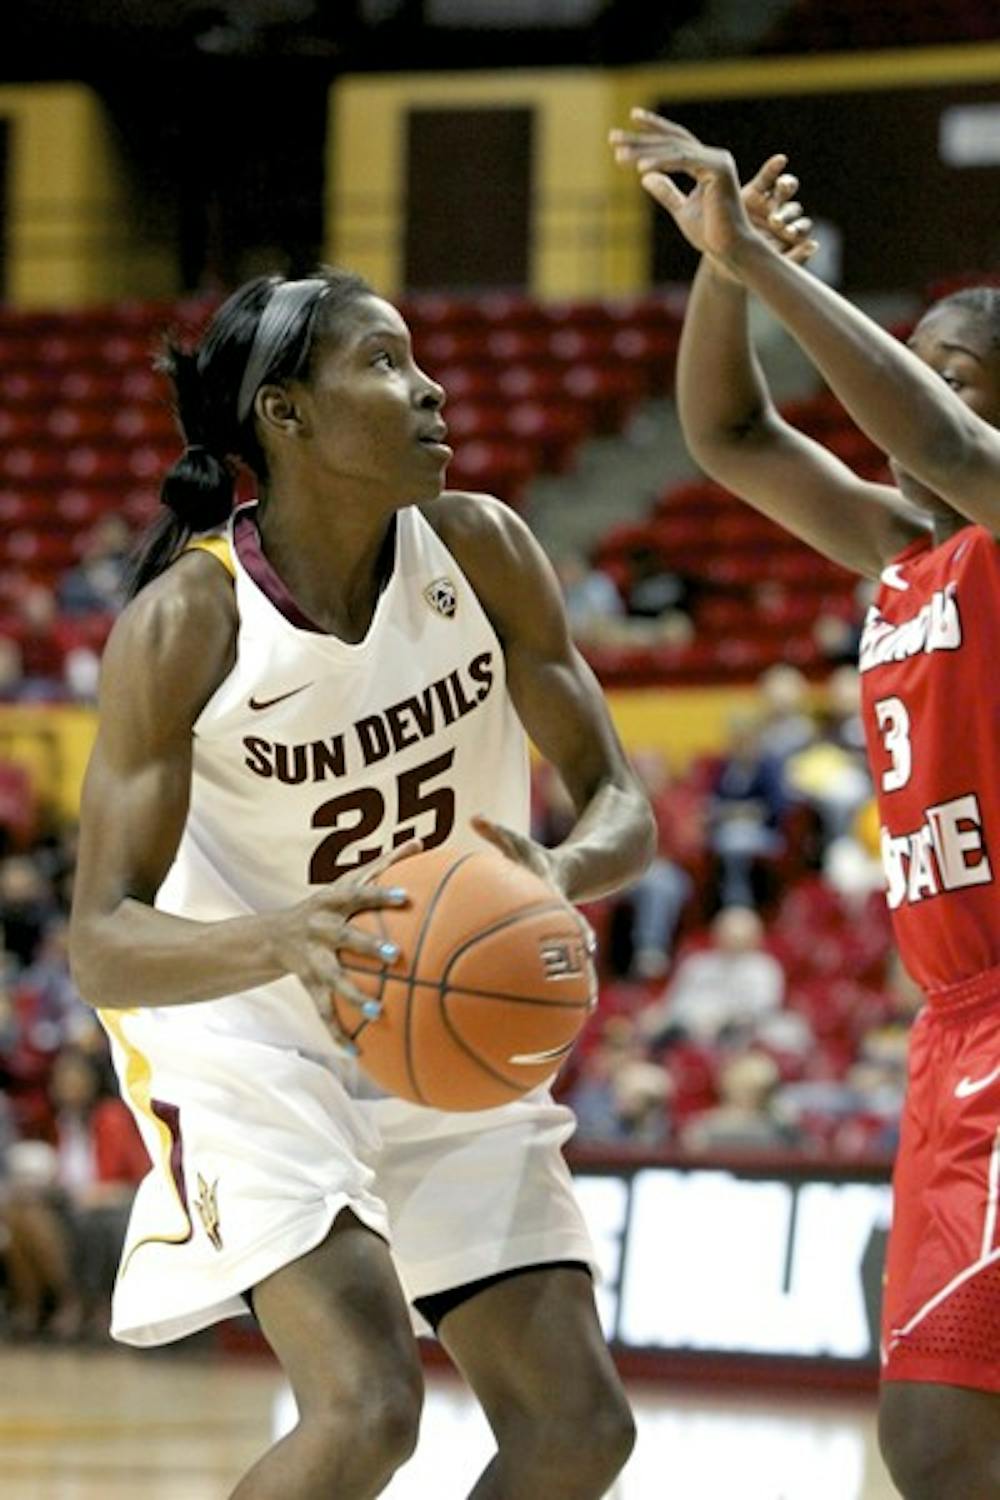 ASU senior guard/forward Kimberly Brandon (left) looks to shoot over Illinois State junior guard Candace Sykes during the Sun Devils’ 77-54 win over the Red Birds on Saturday. The Sun Devils won both of their games at the annual ASU Classic at Wells Fargo Arena over the weekend. (Photo by Sam Rosenbaum)